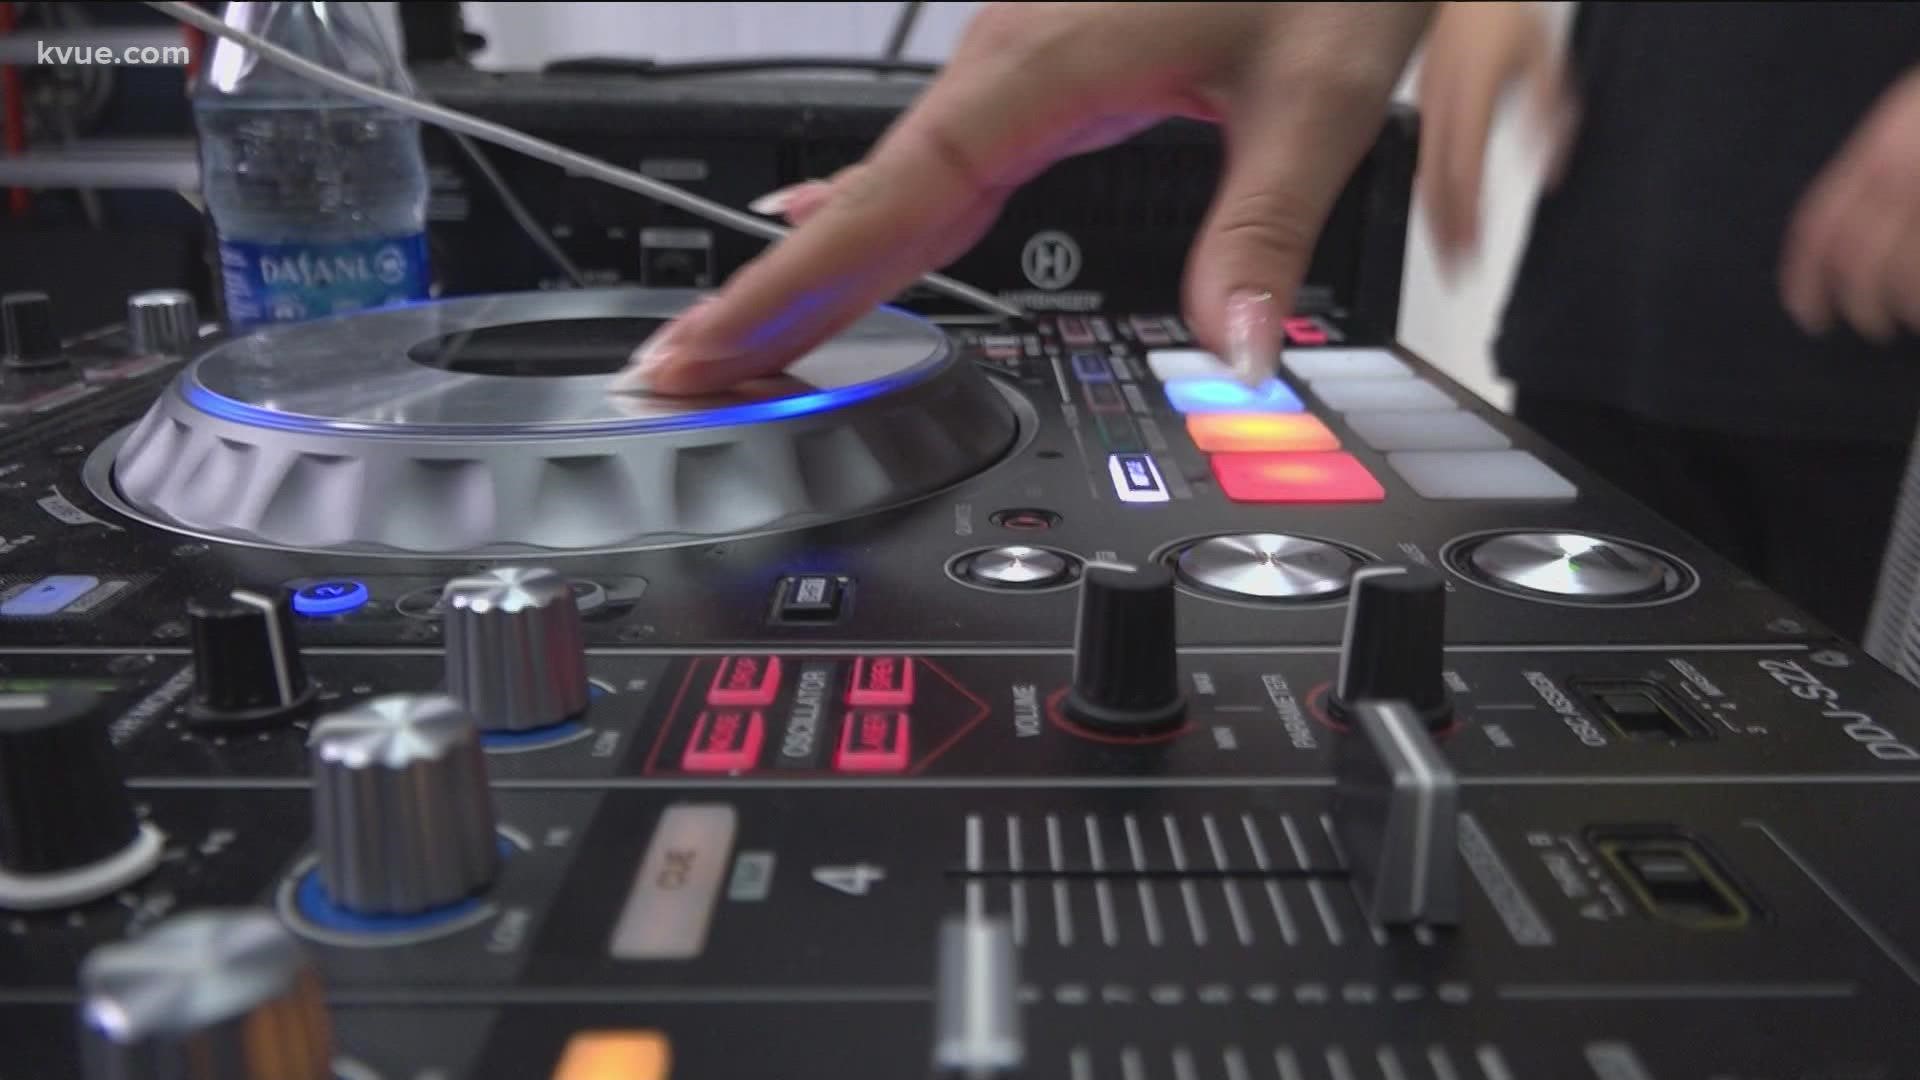 For this Take This Job, KVUE's Hannah Rucker shadowed a local DJ who enjoys mixing tunes downtown.